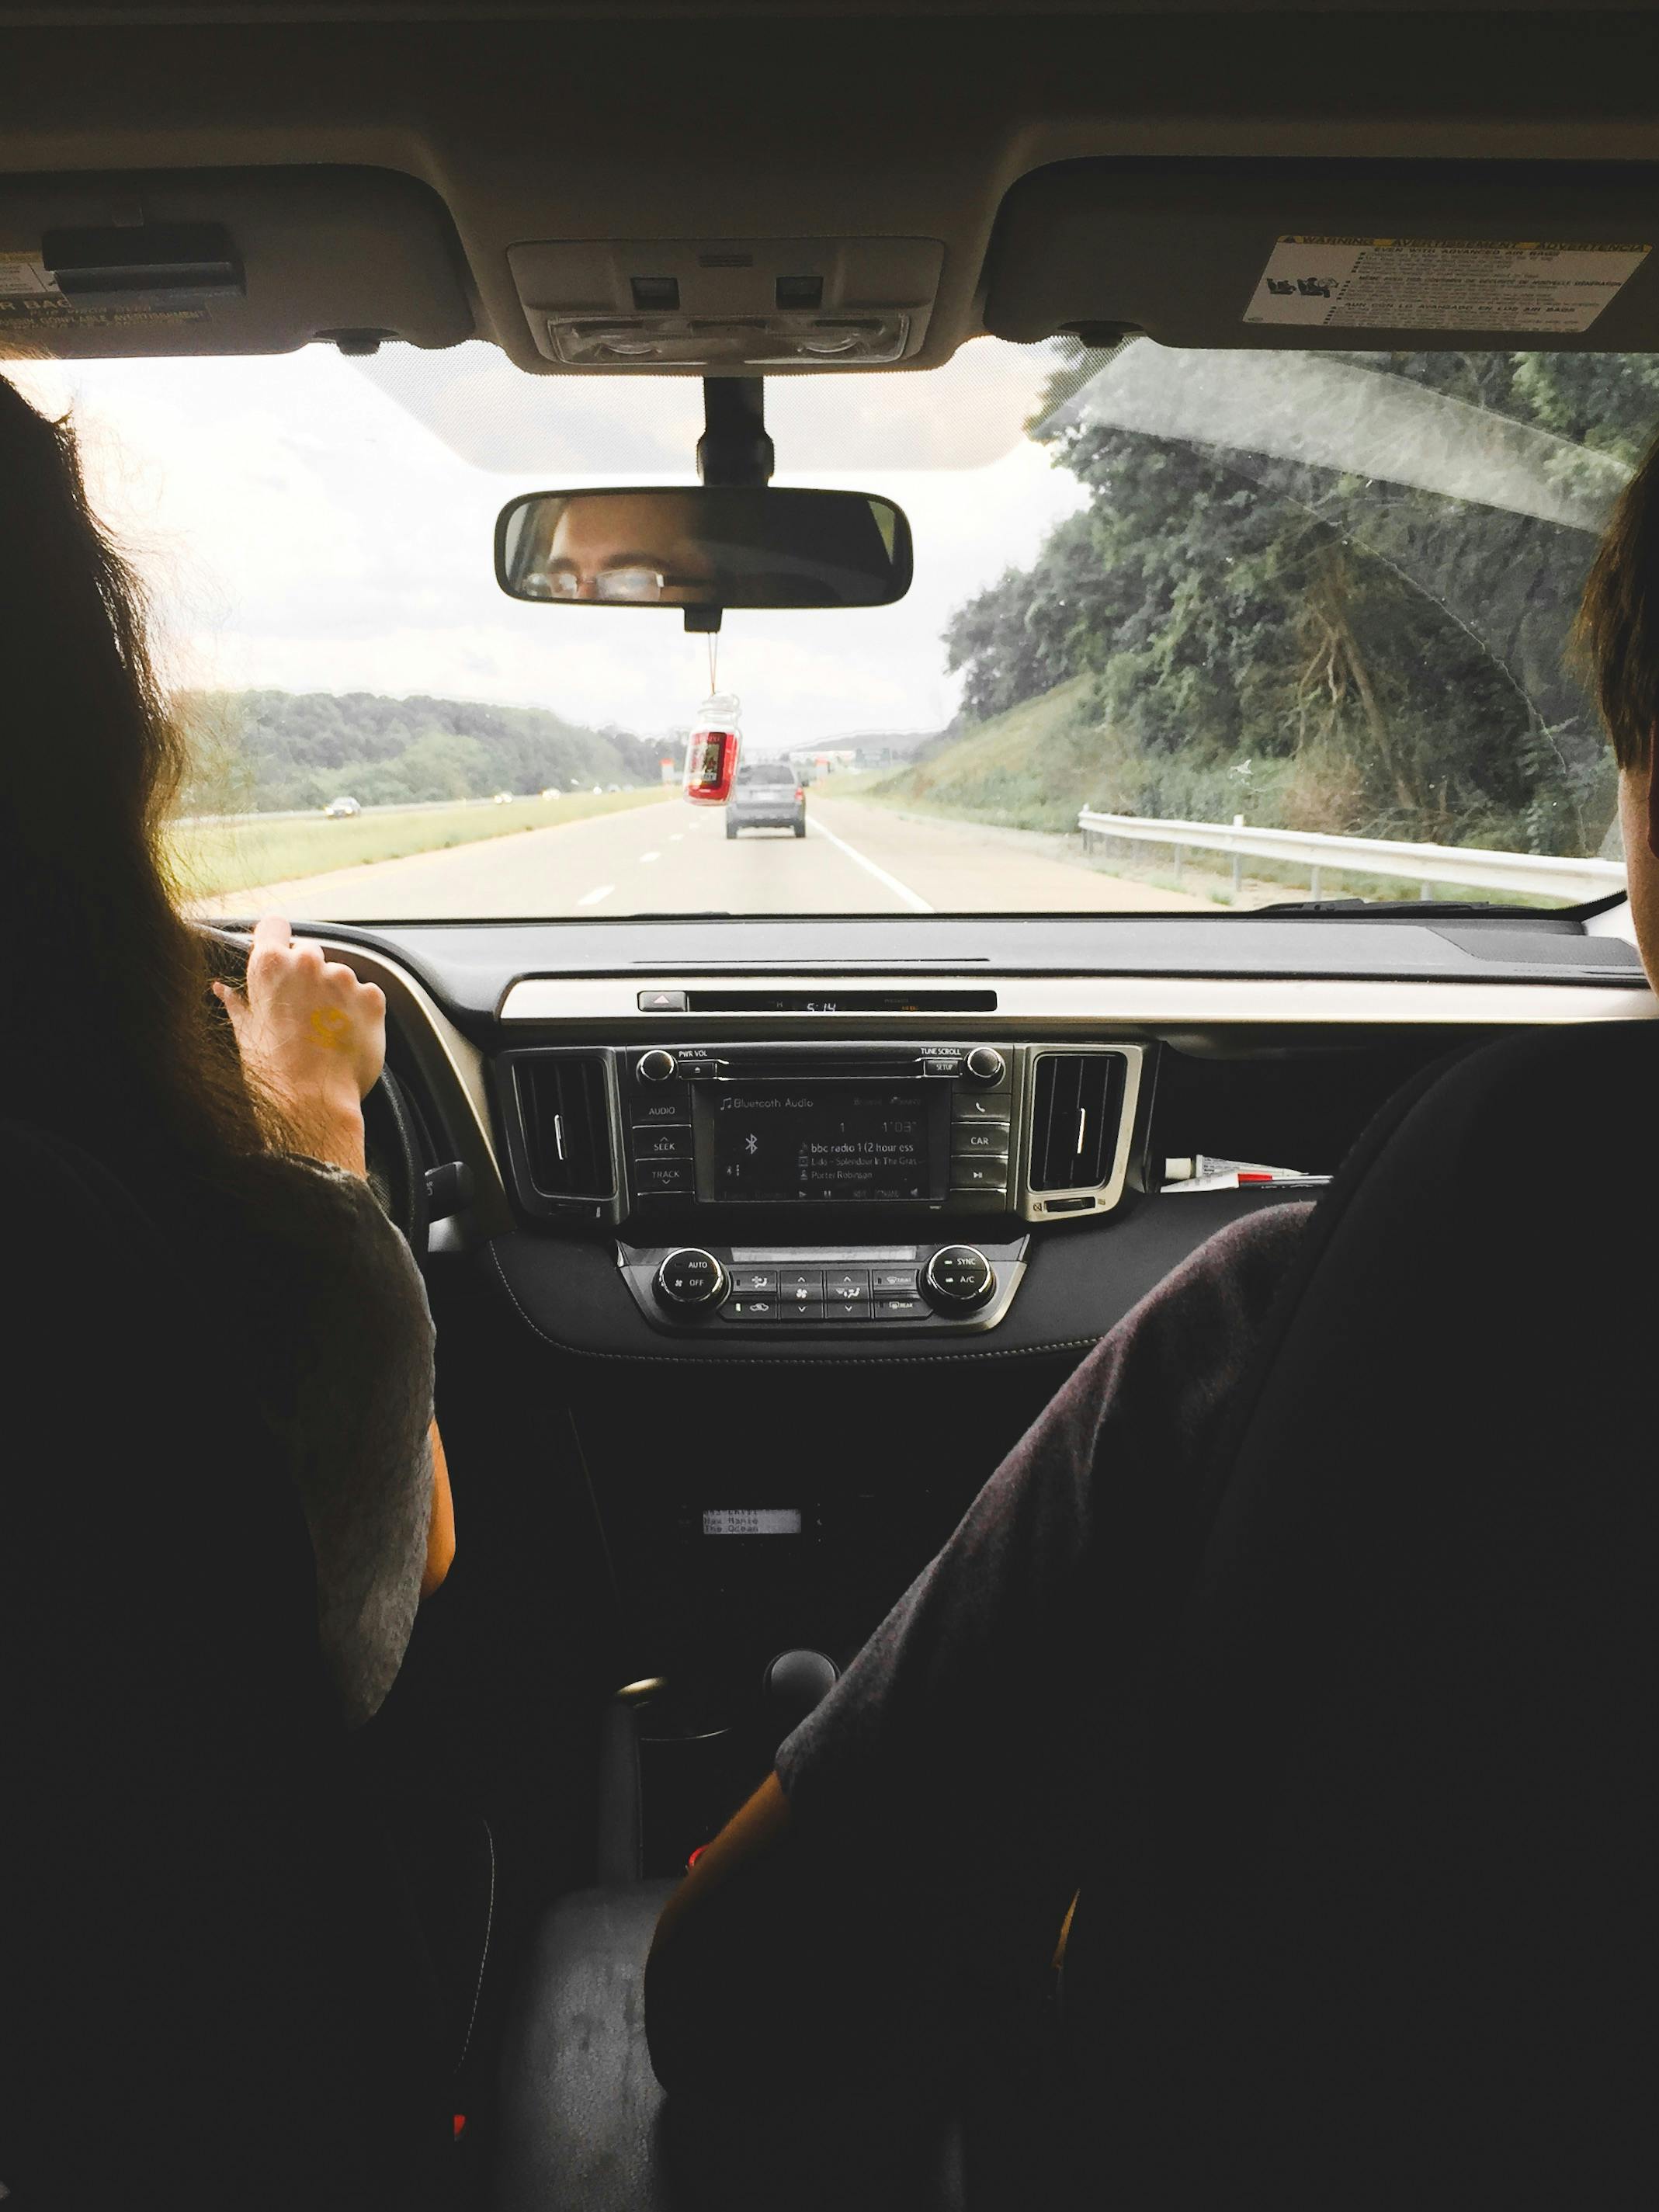 People in a moving car. For illustration purposes only | Source: Pexels